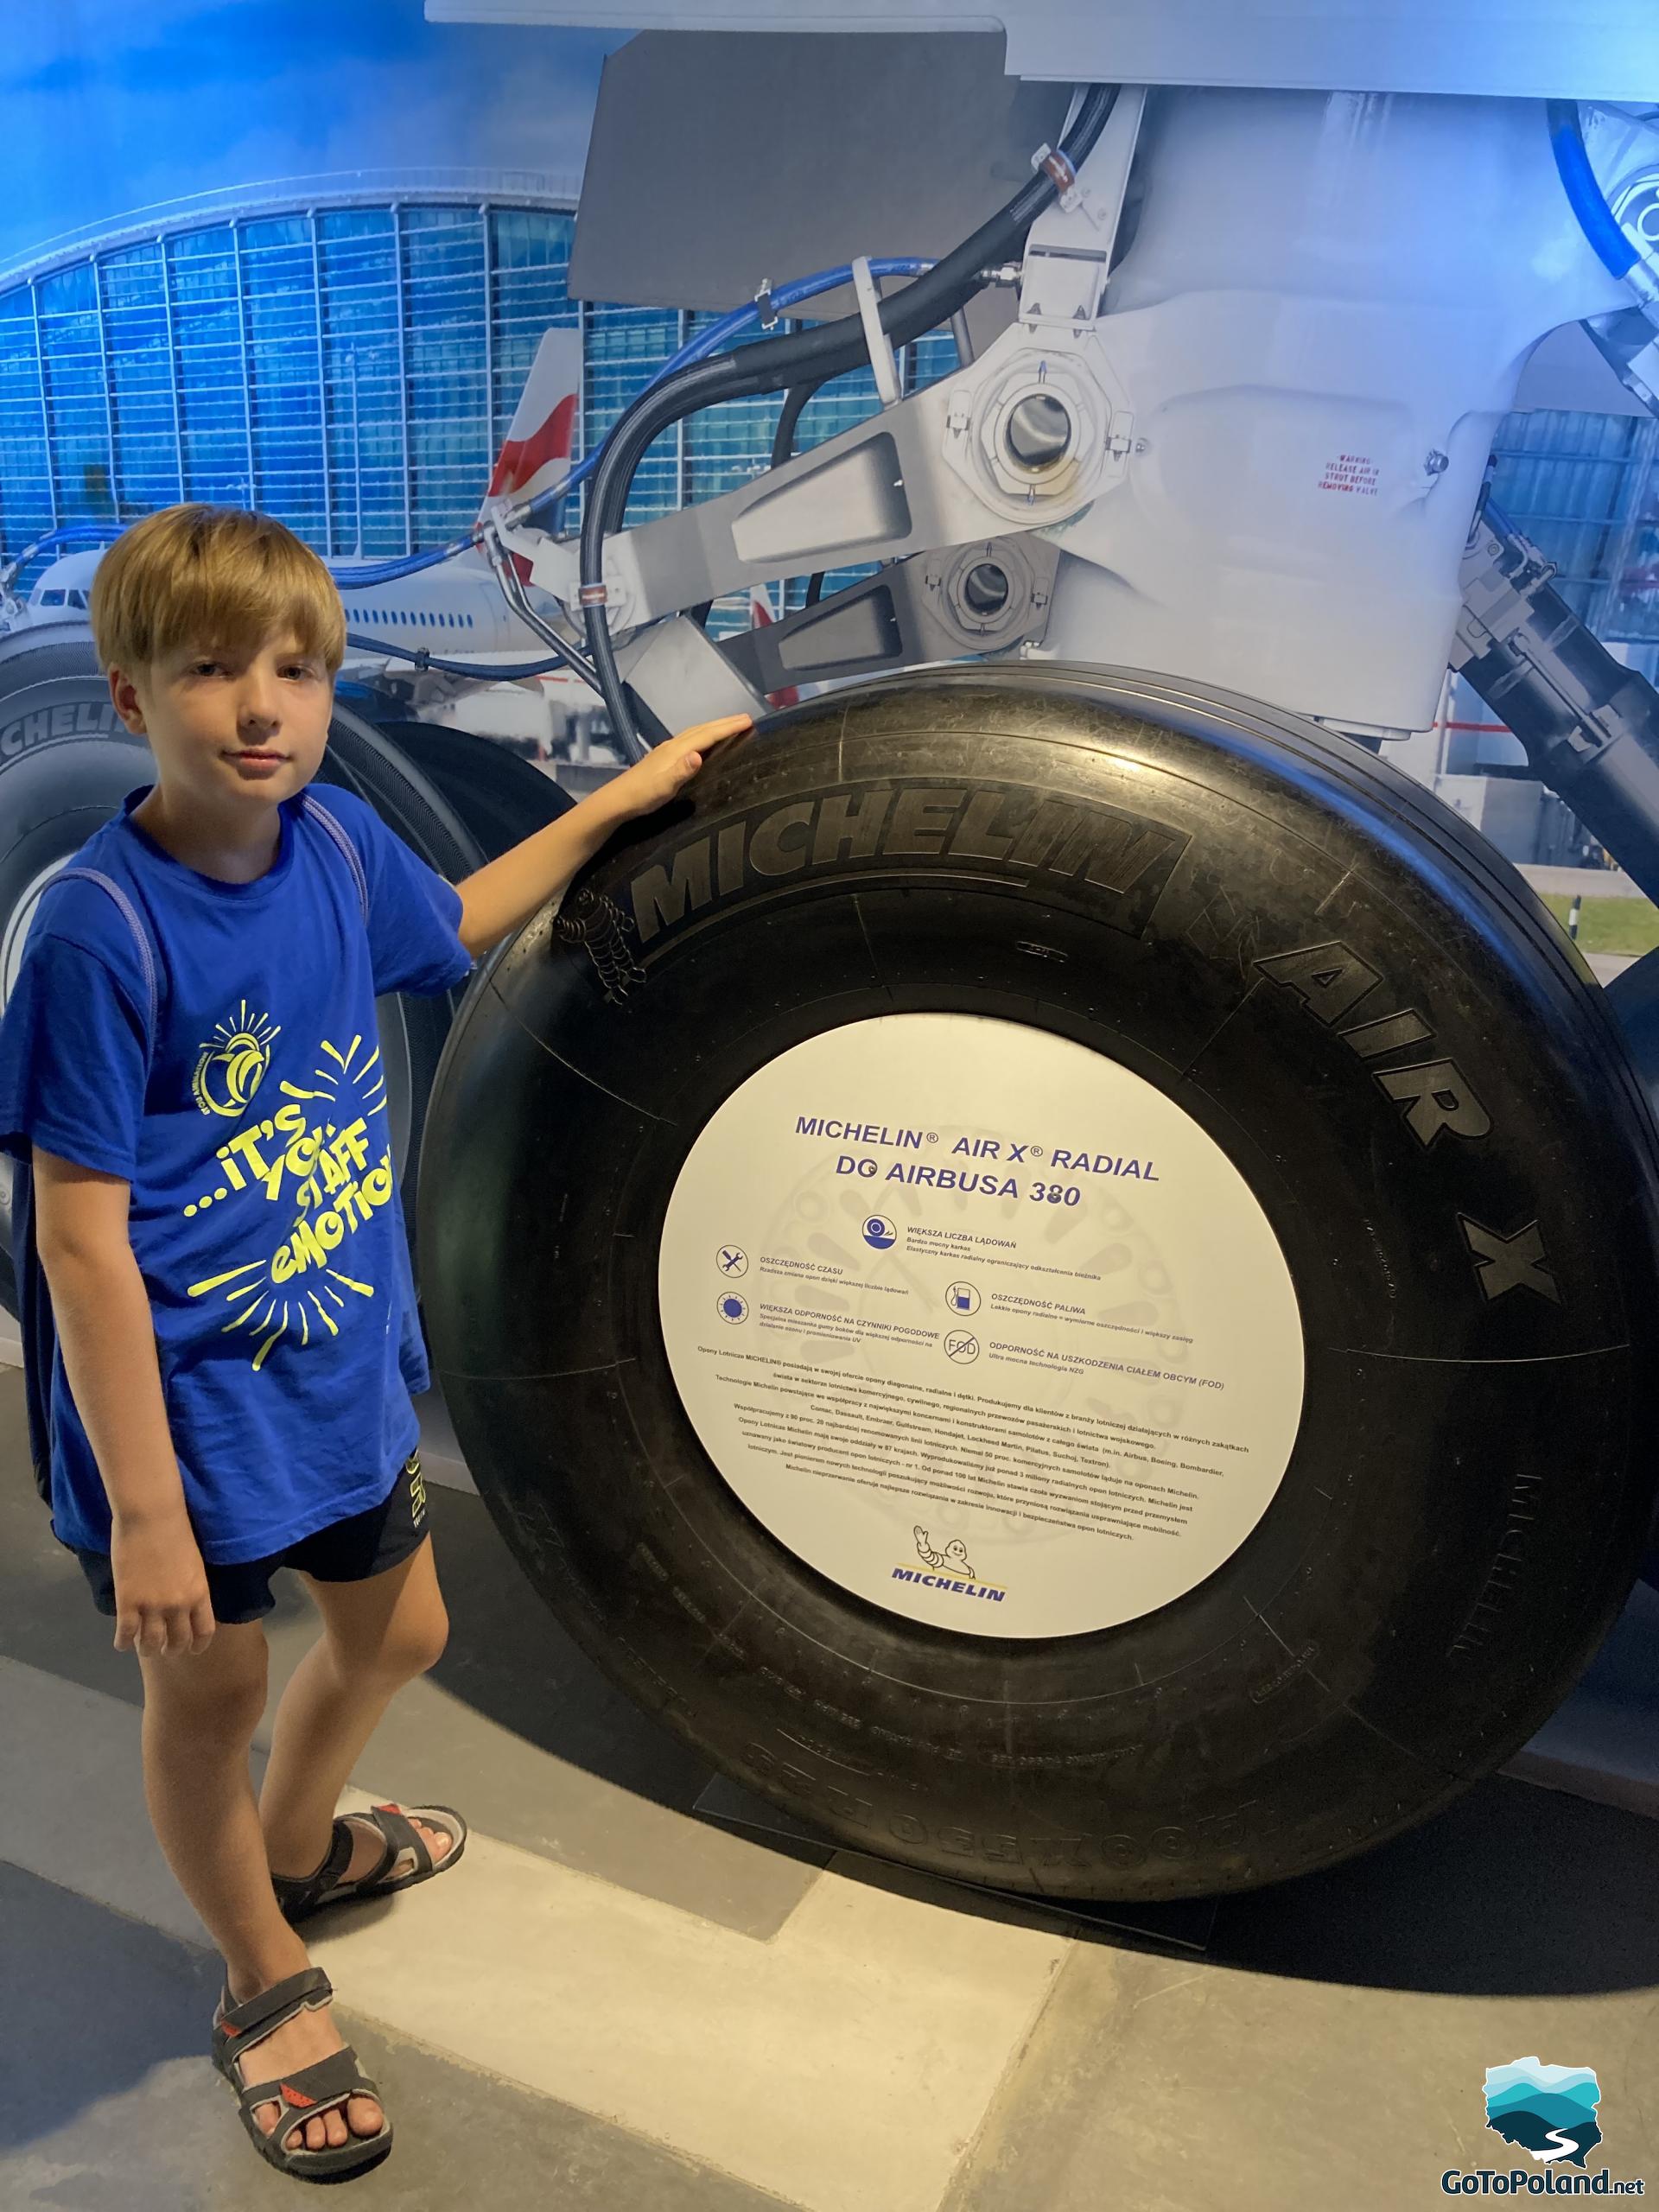 a boy is standing in front of a huge tire made for Airbus aircraft